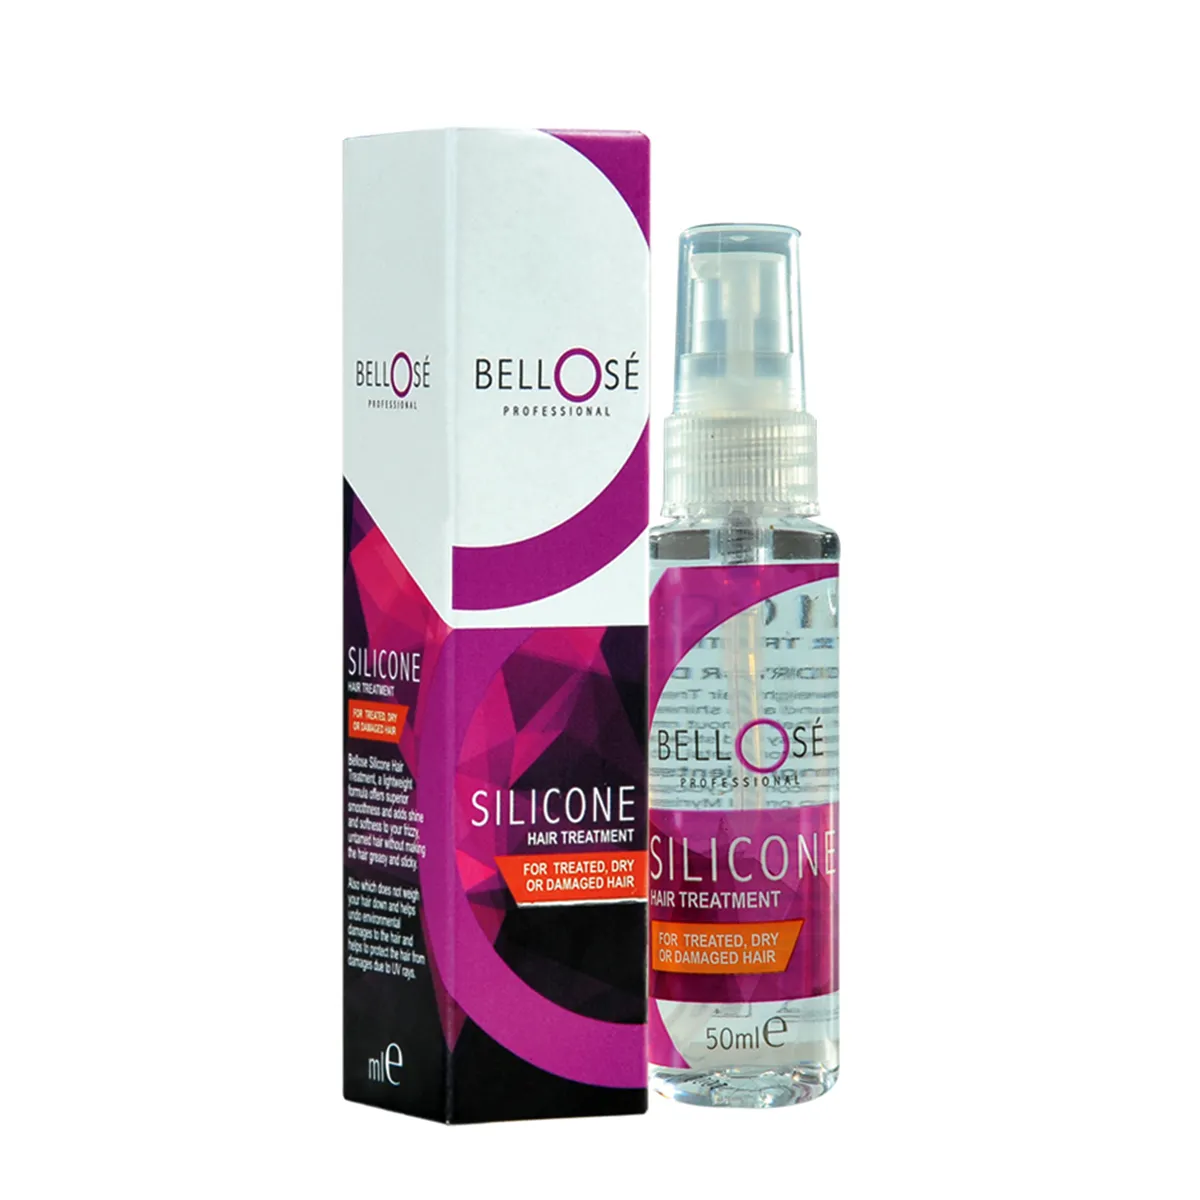 First product image of Bellose Silicone Hair Treatment 50ml